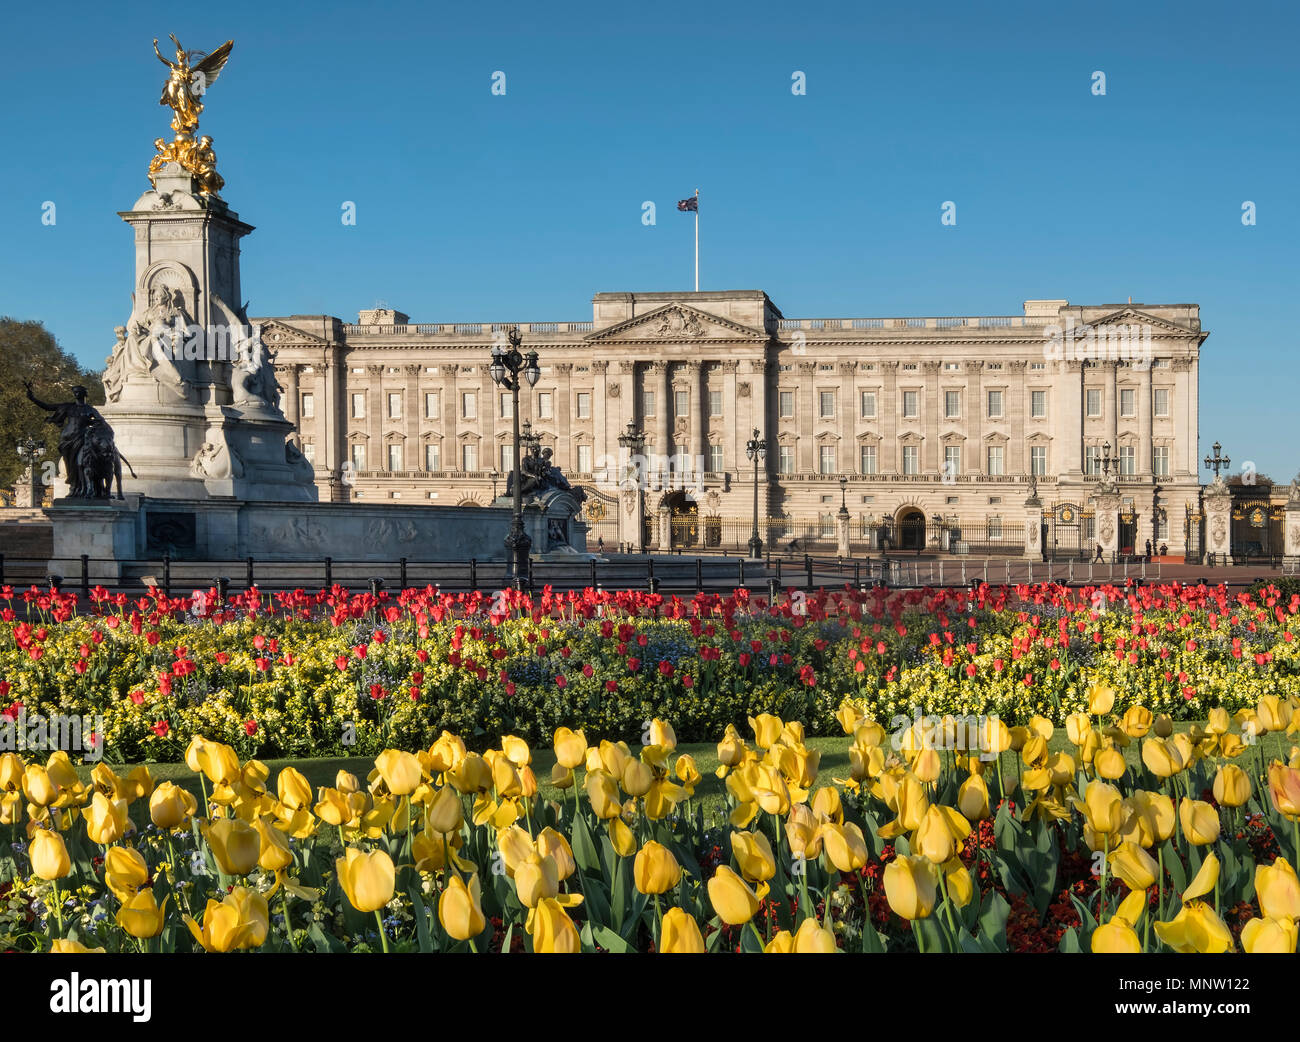 Buckingham Palace & the Victoria Memorial in spring, London, England, UK Stock Photo